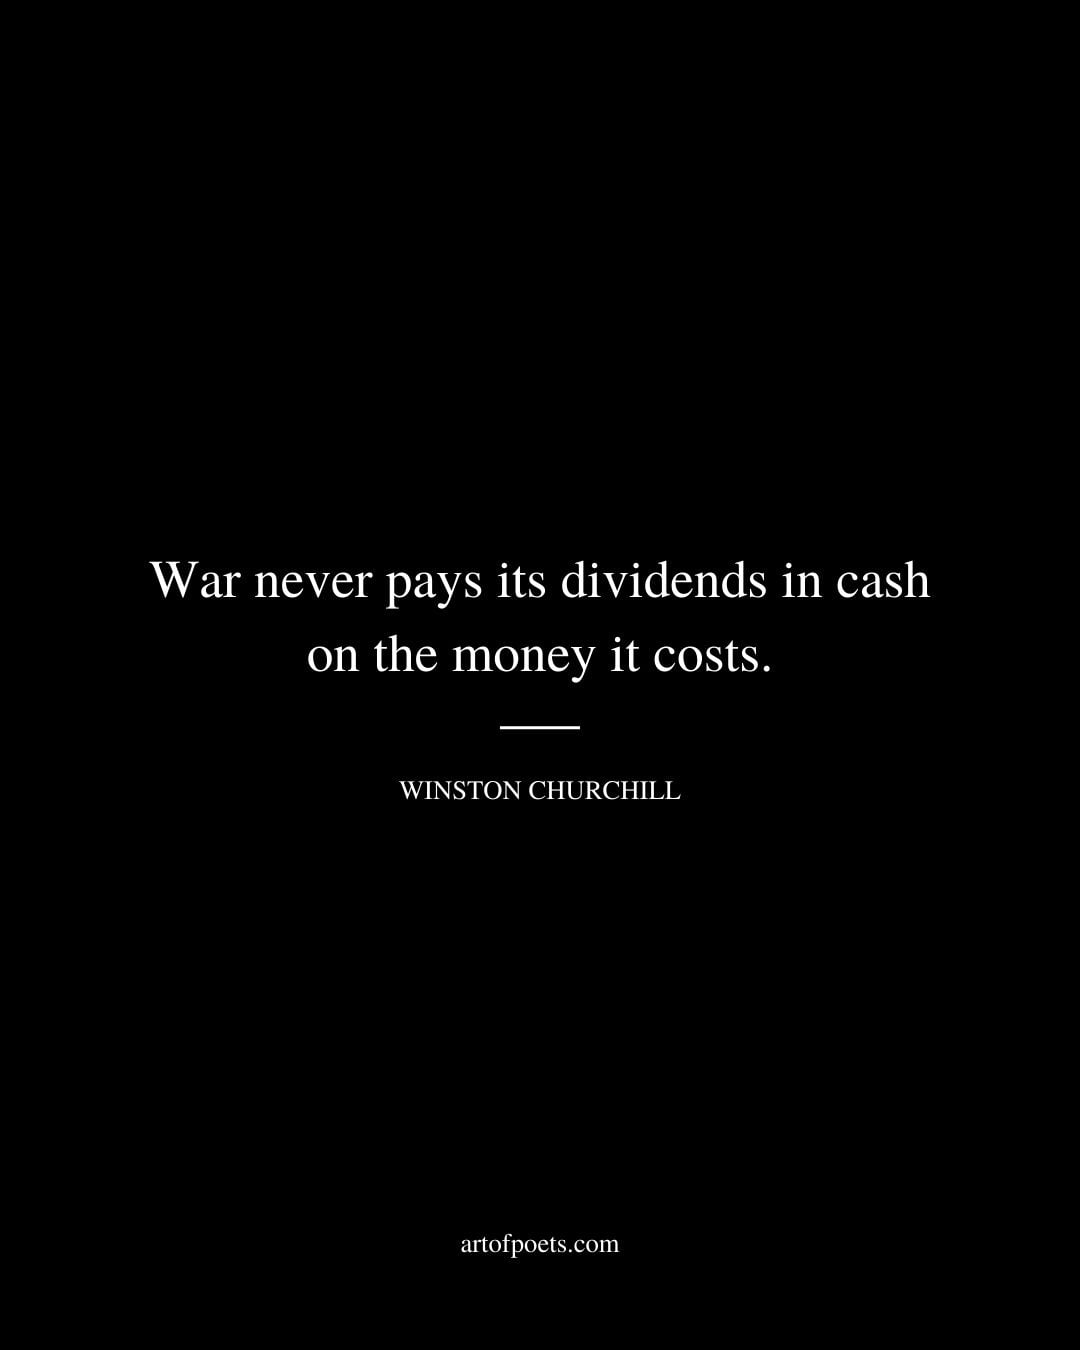 War never pays its dividends in cash on the money it costs